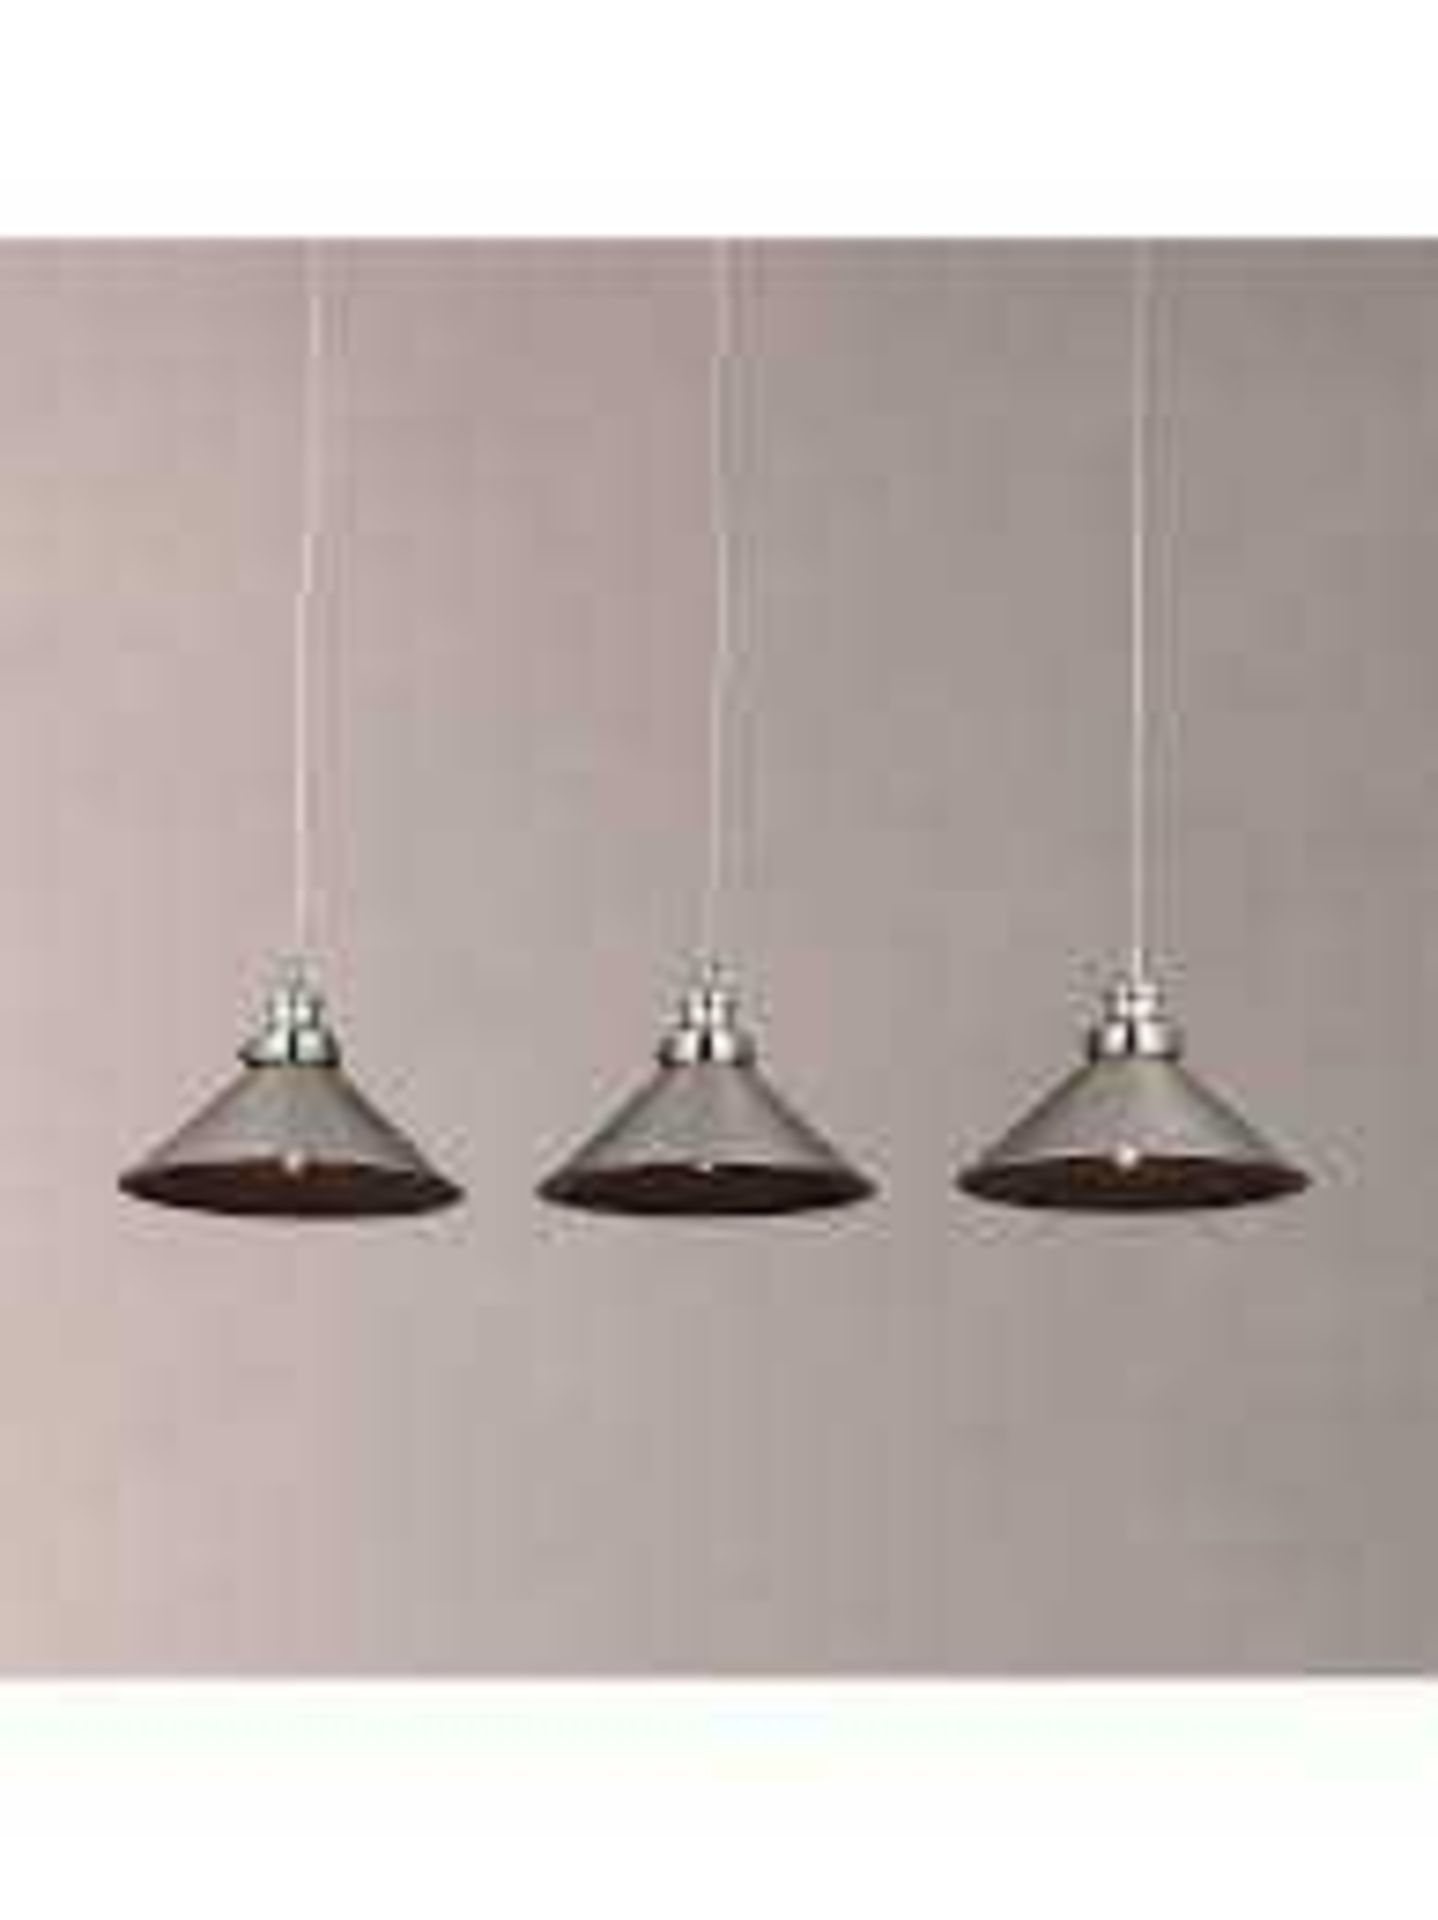 RRP £175 Boxed Croft Collection Tobias 3 Light Dinner Light Pendant 415611 (Appraisals Available